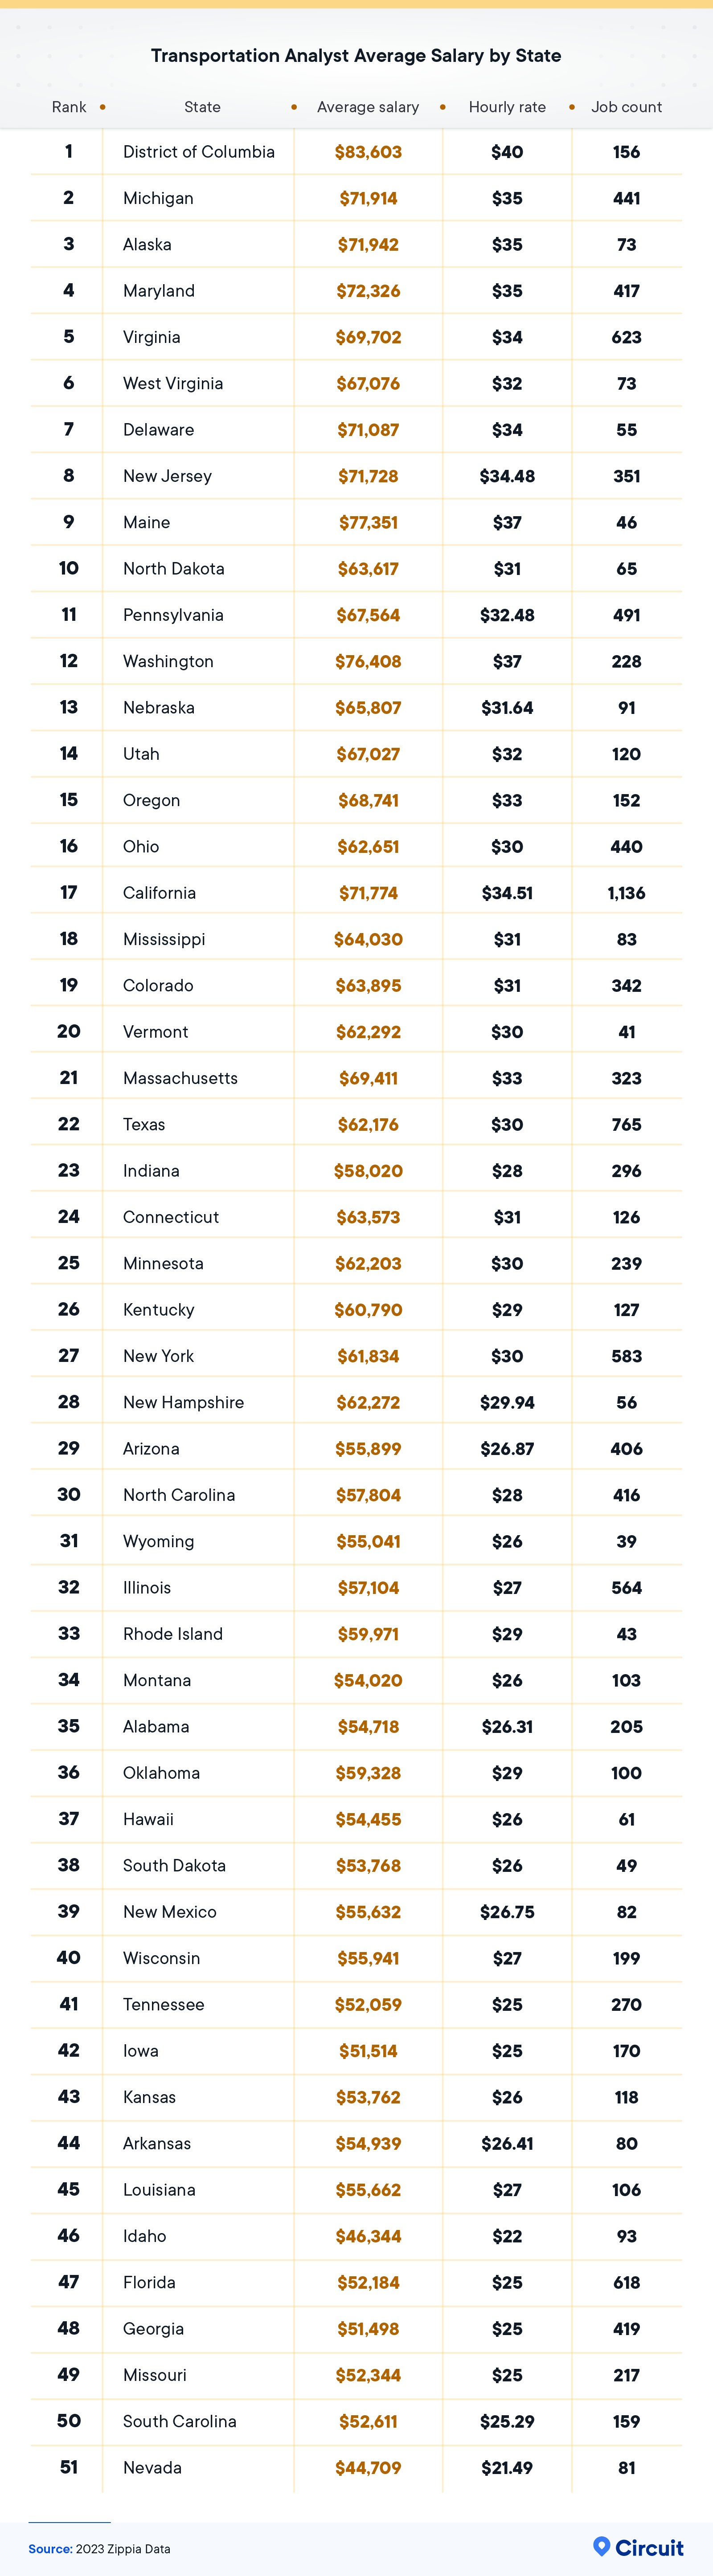 Transportation analysts average salary by state